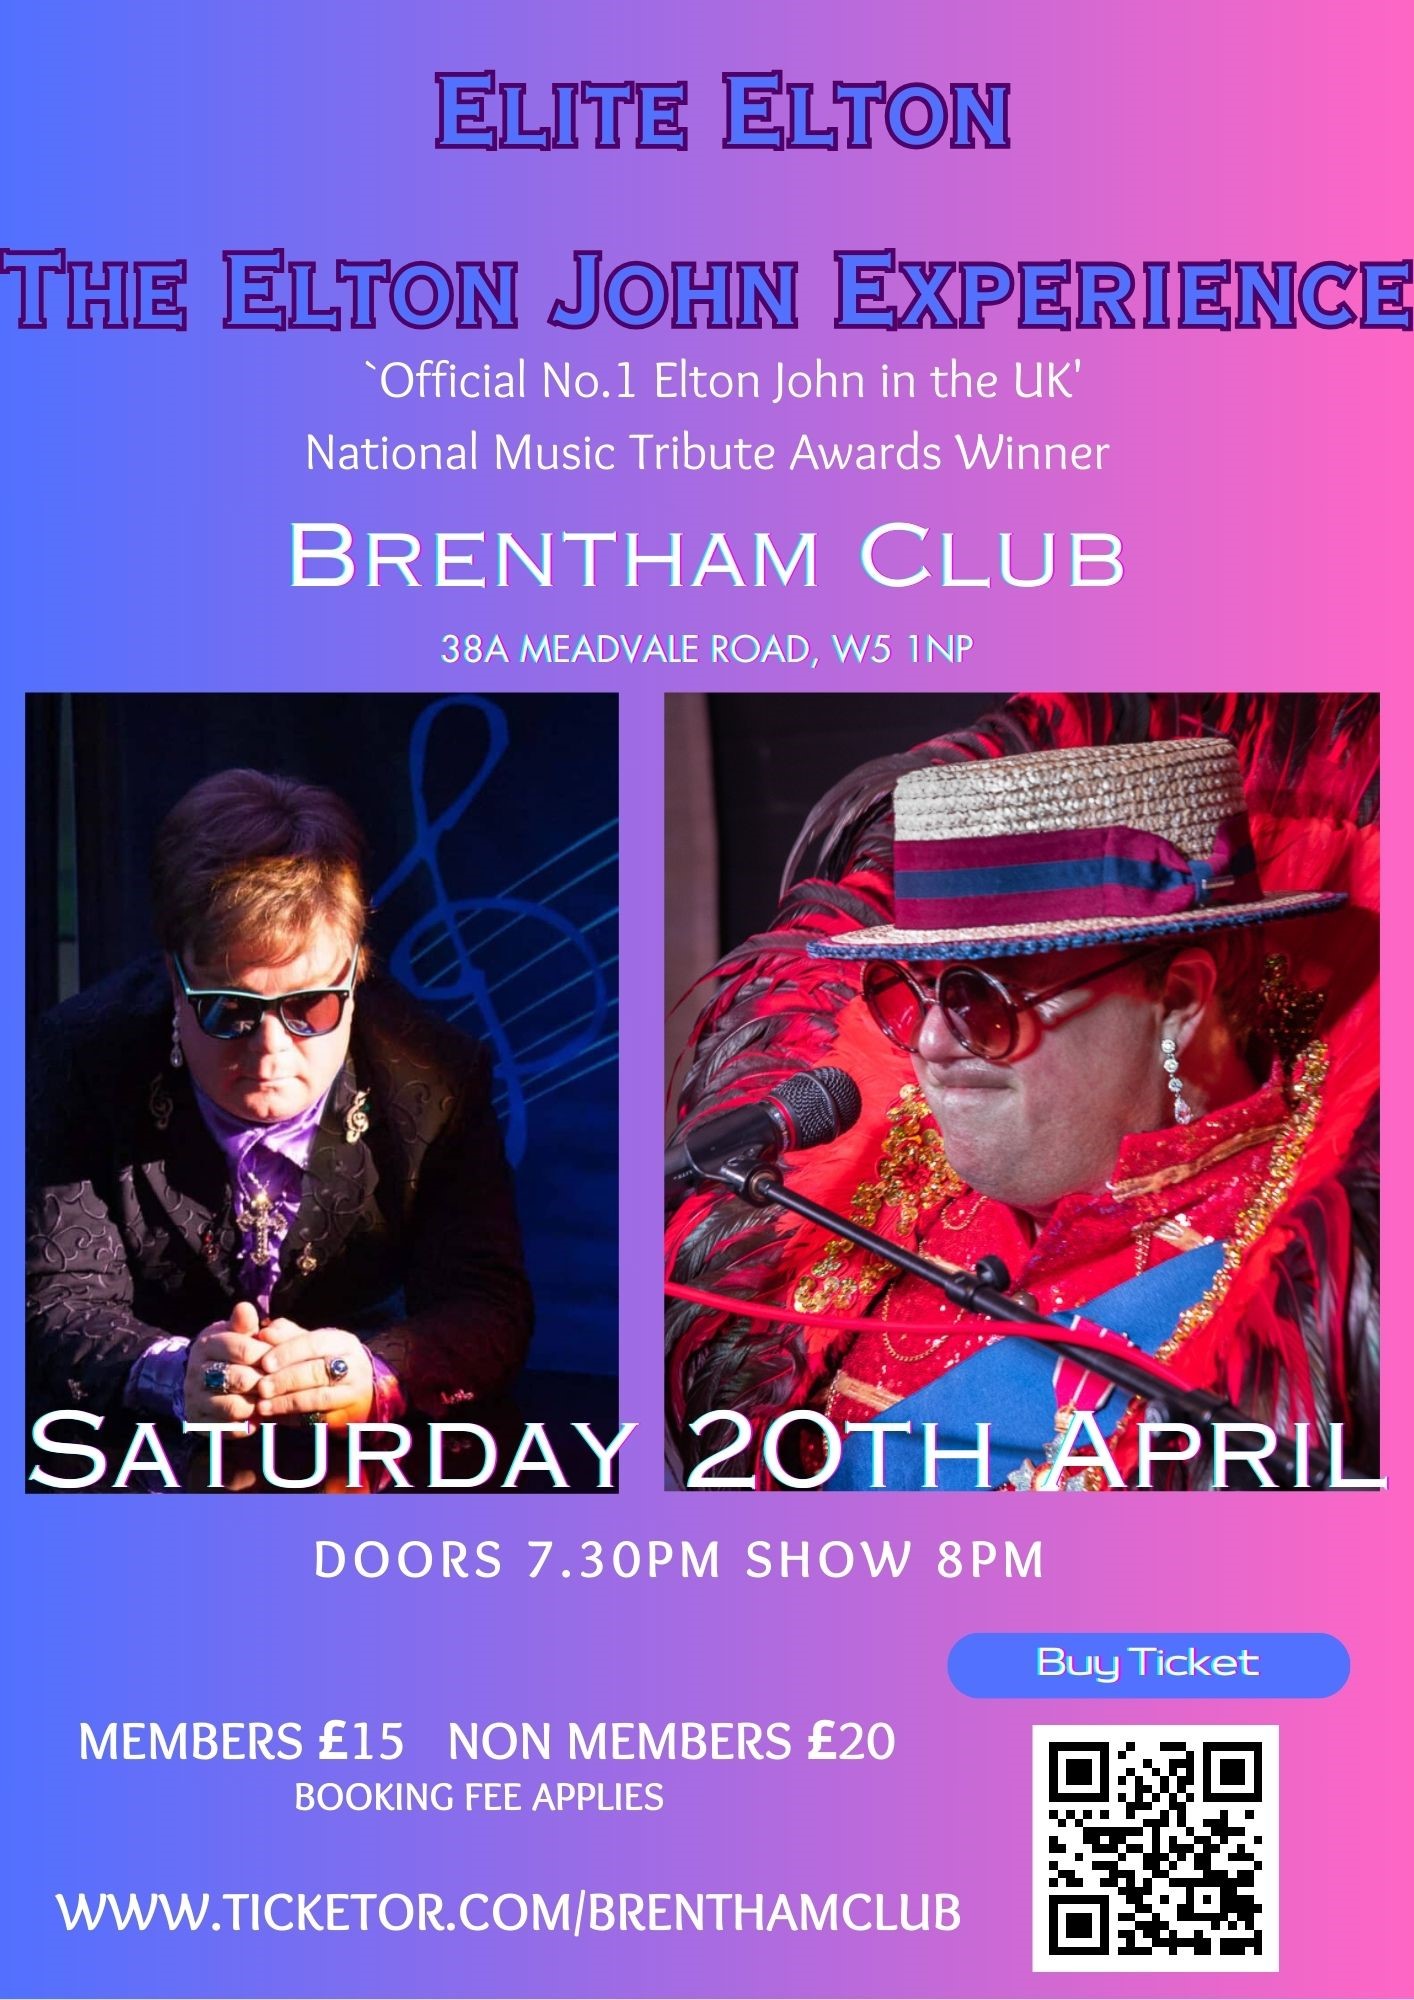 The Elton John Experience Elite Elton on Apr 20, 20:00@The Brentham Club - Buy tickets and Get information on Brenthamclub.co.uk 